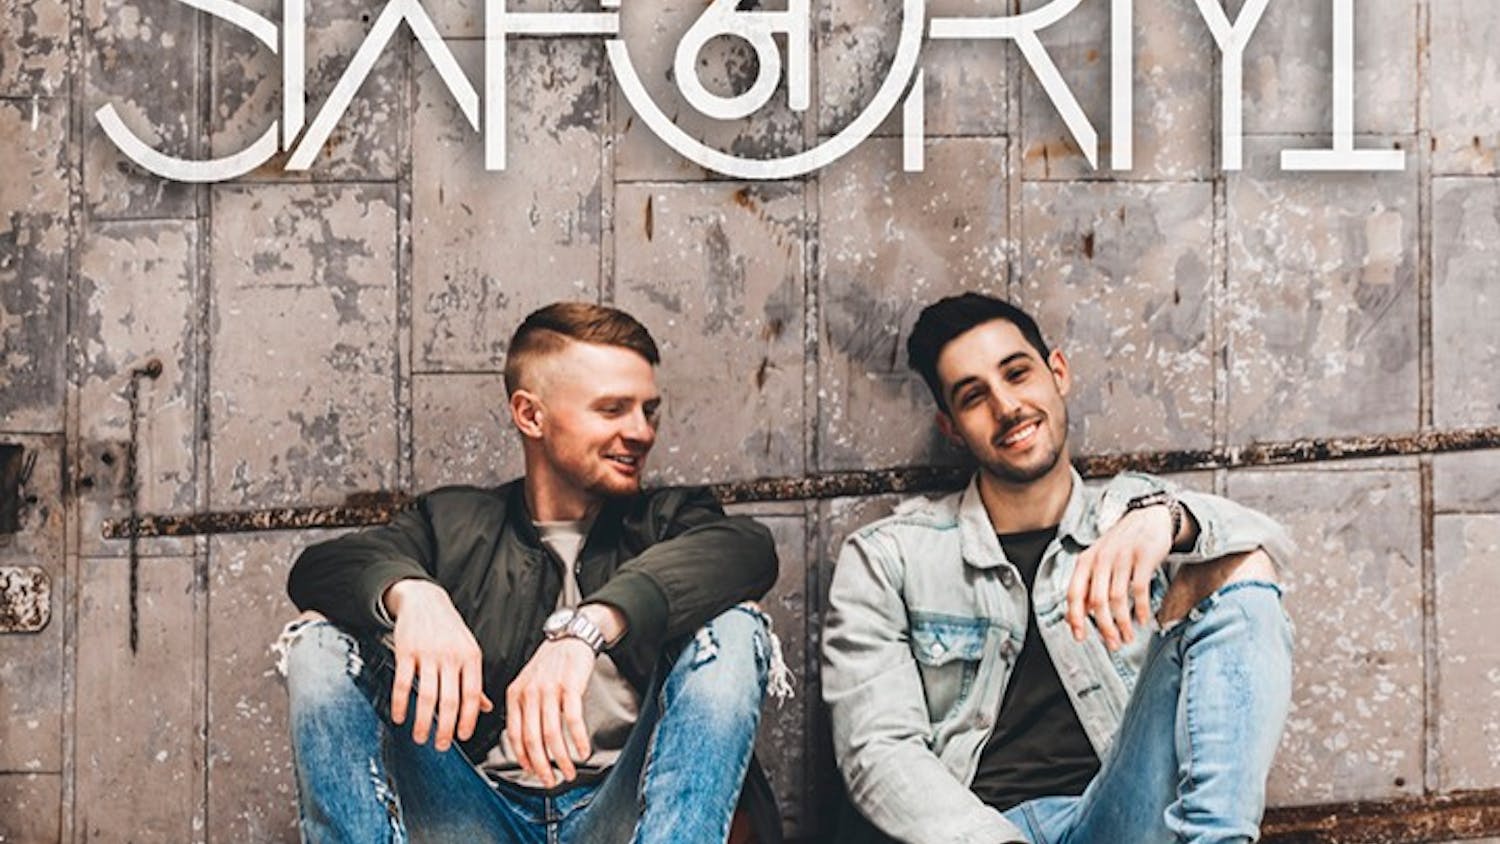 Austin Gee and Brooks Hoffman make up the new country music duo named SixForty1. The band will be hosting a free concert at The Senate this Saturday, Oct. 17.